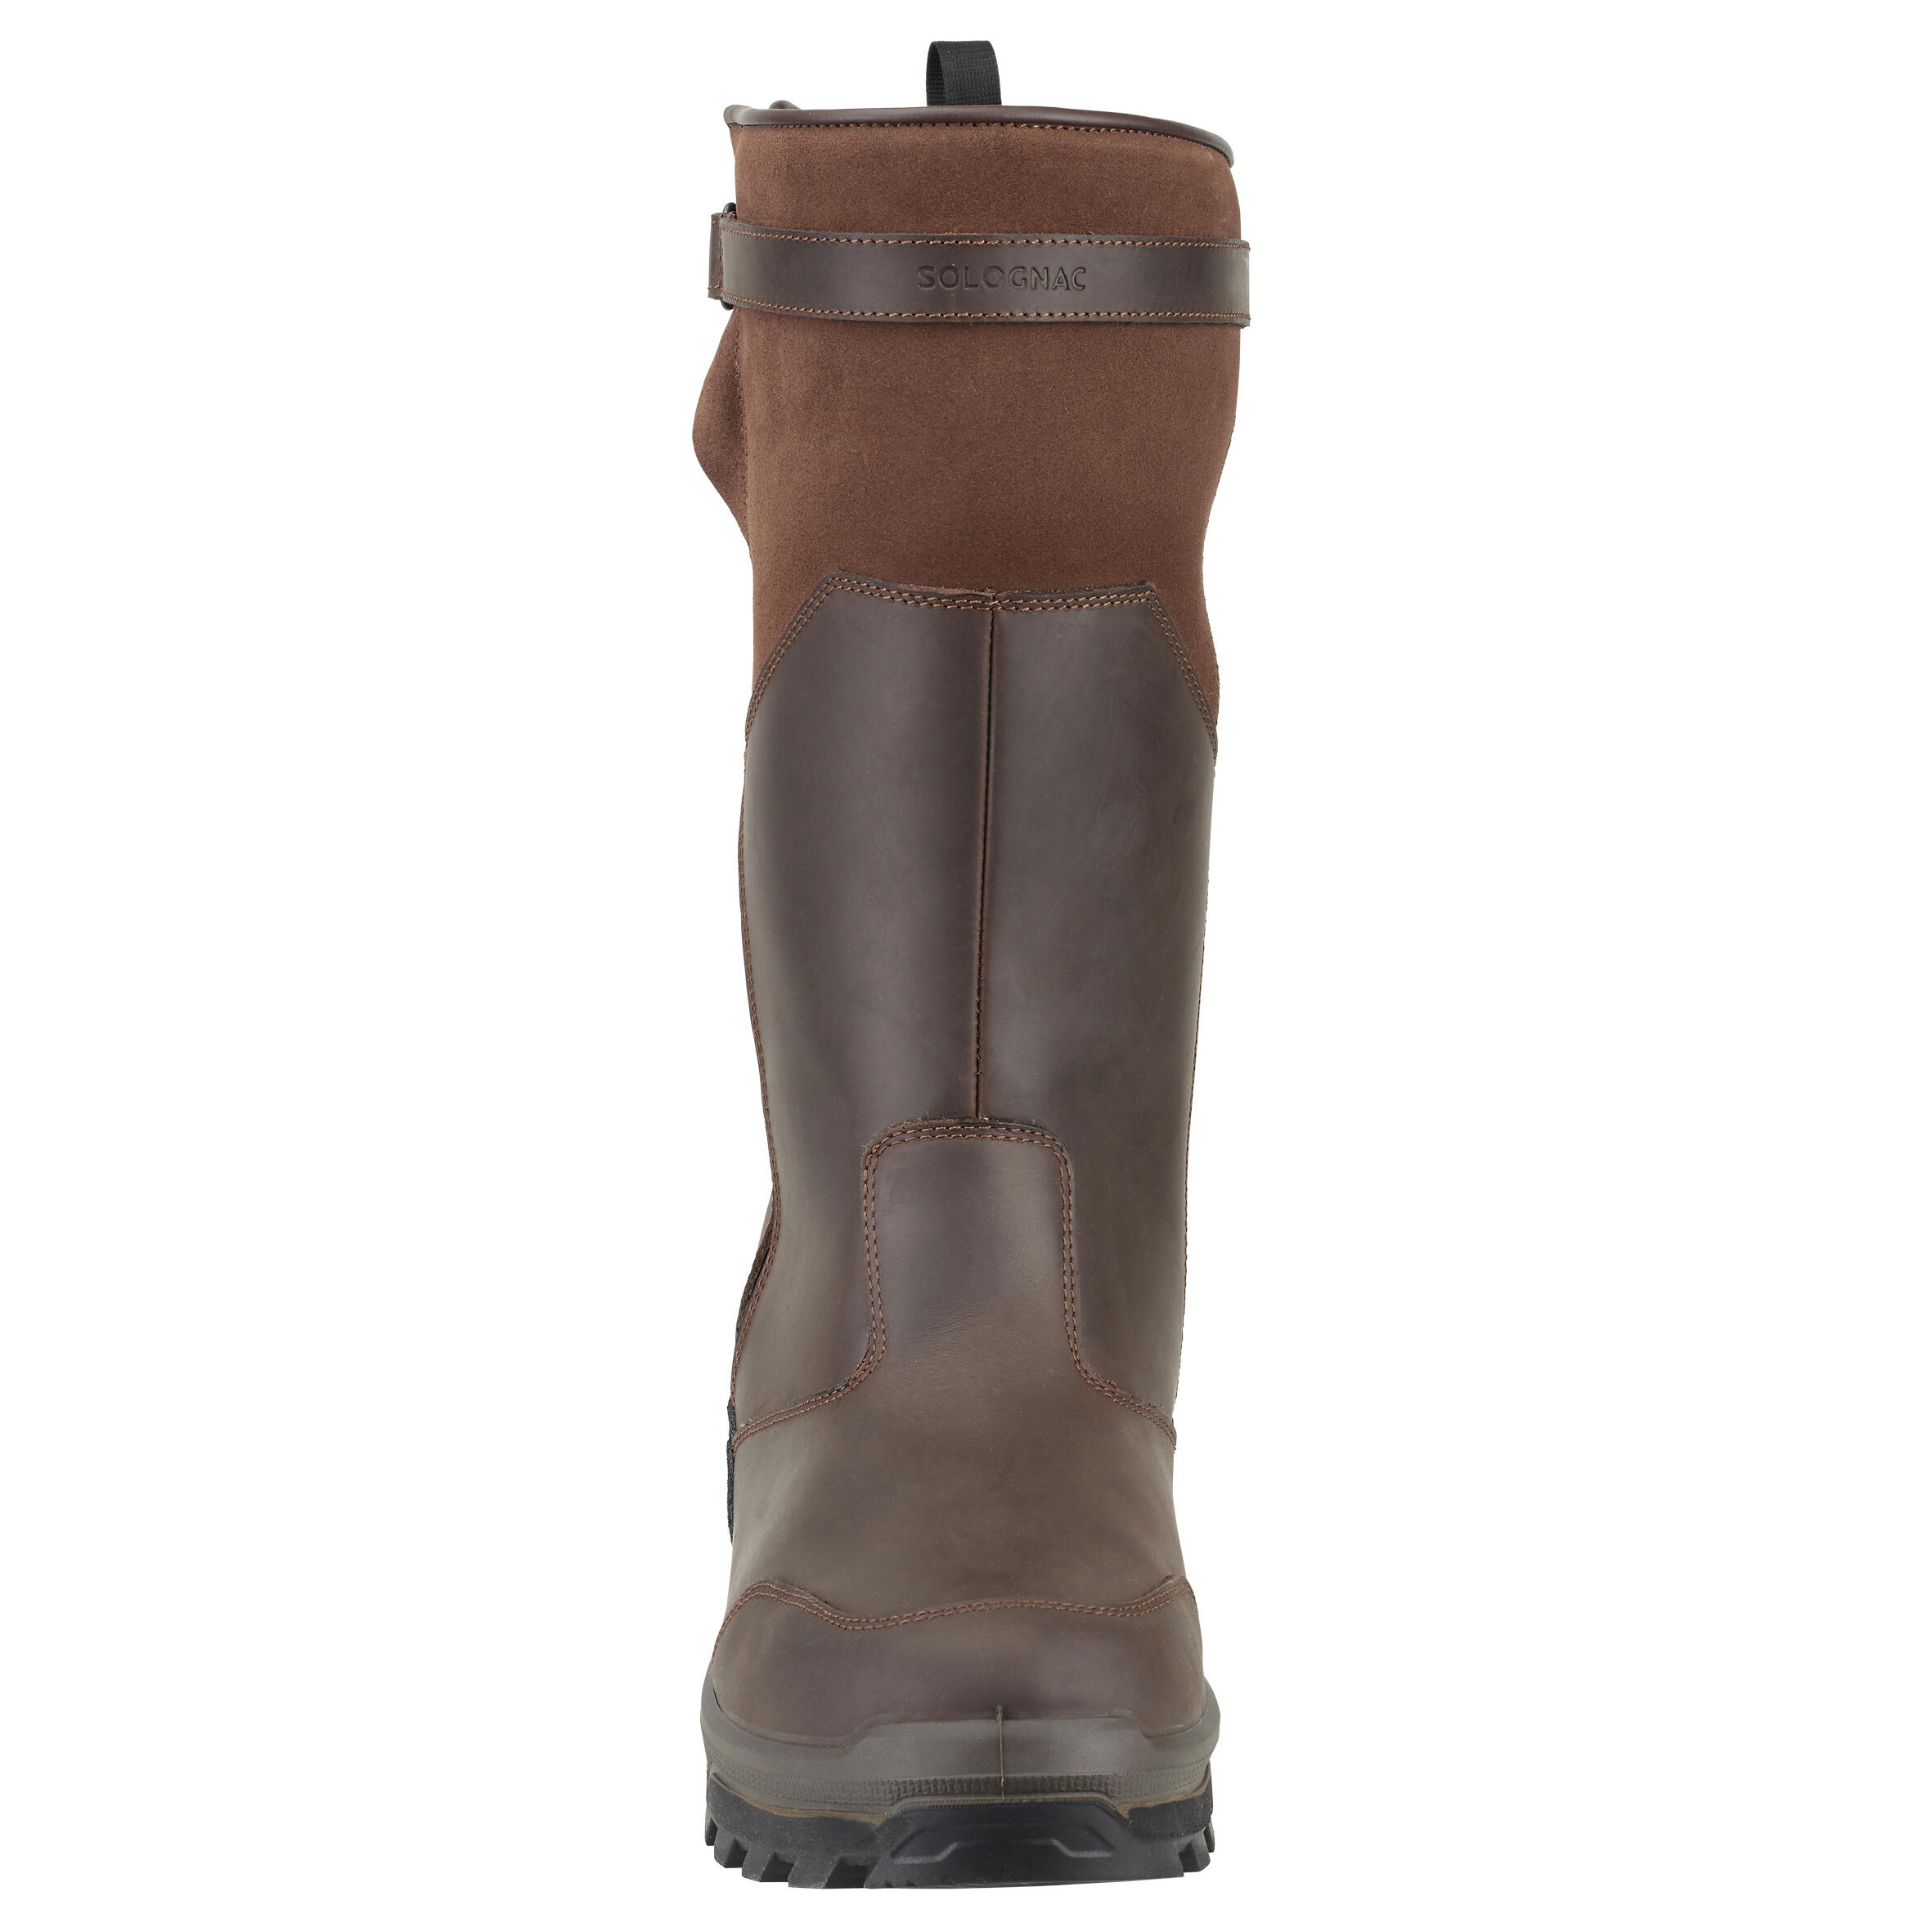 Warm and waterproof leather boots 900. 5/6